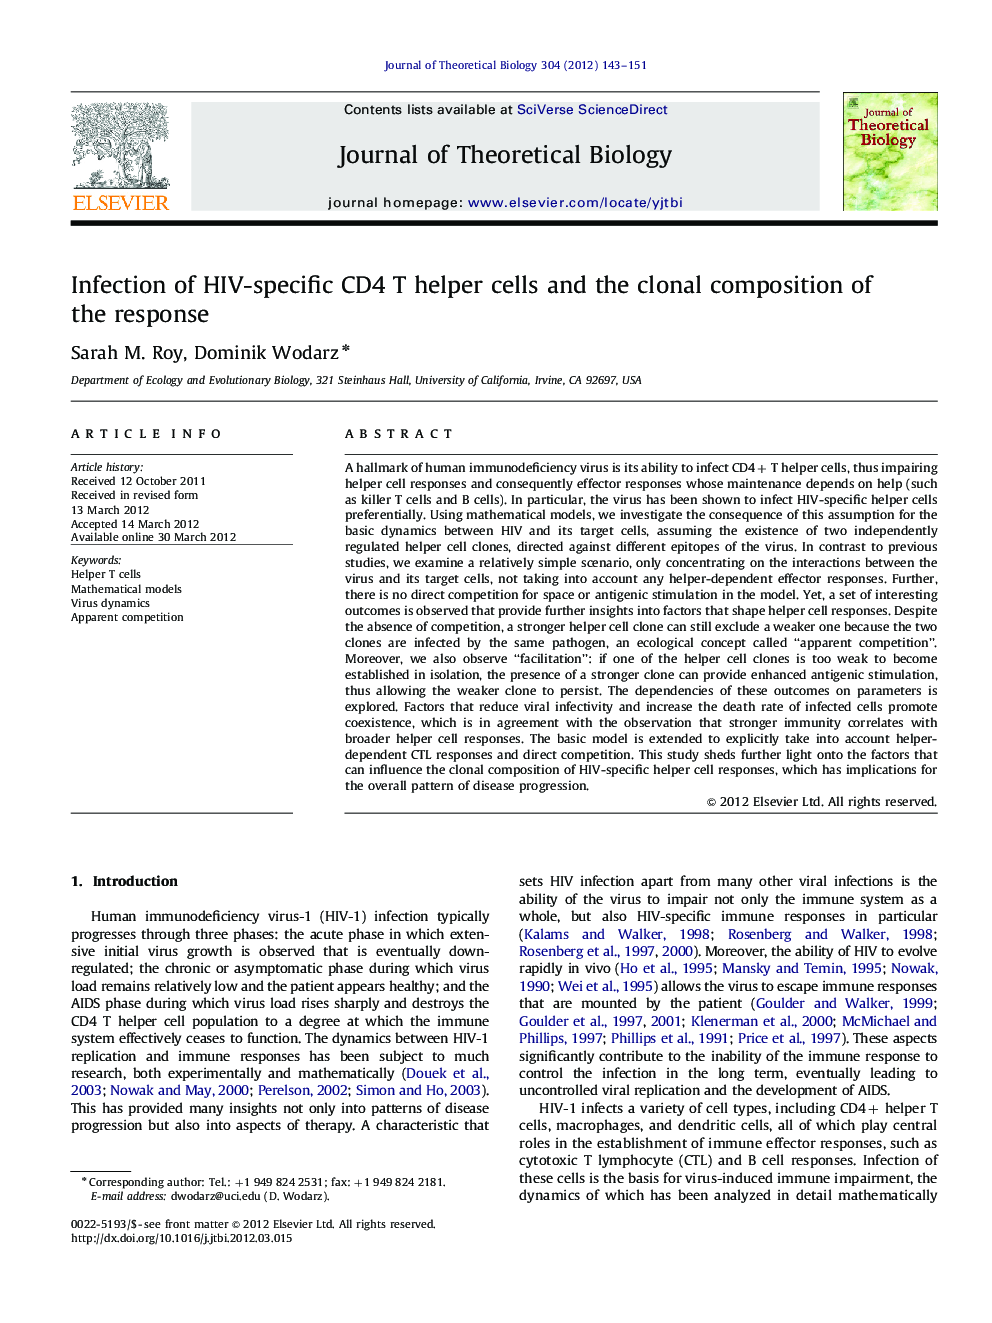 Infection of HIV-specific CD4 T helper cells and the clonal composition of the response